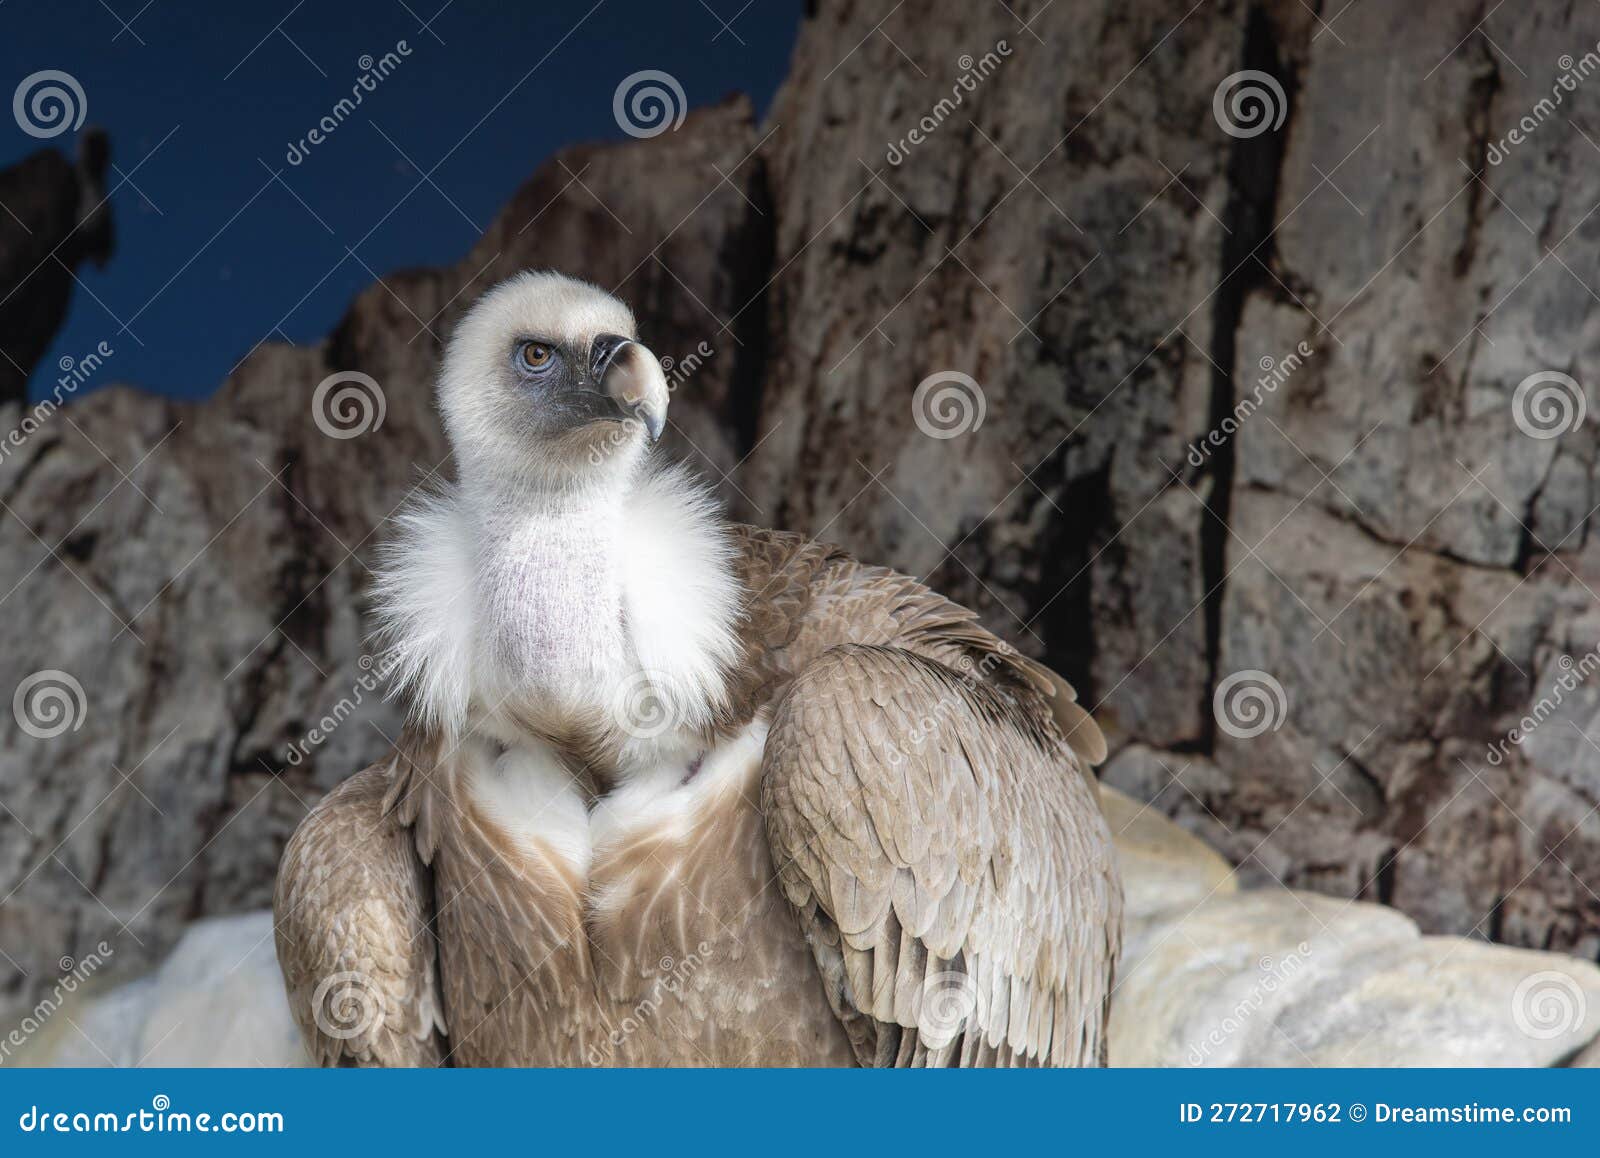 detail of a griffon vulture, gyps fulvus, in captivity